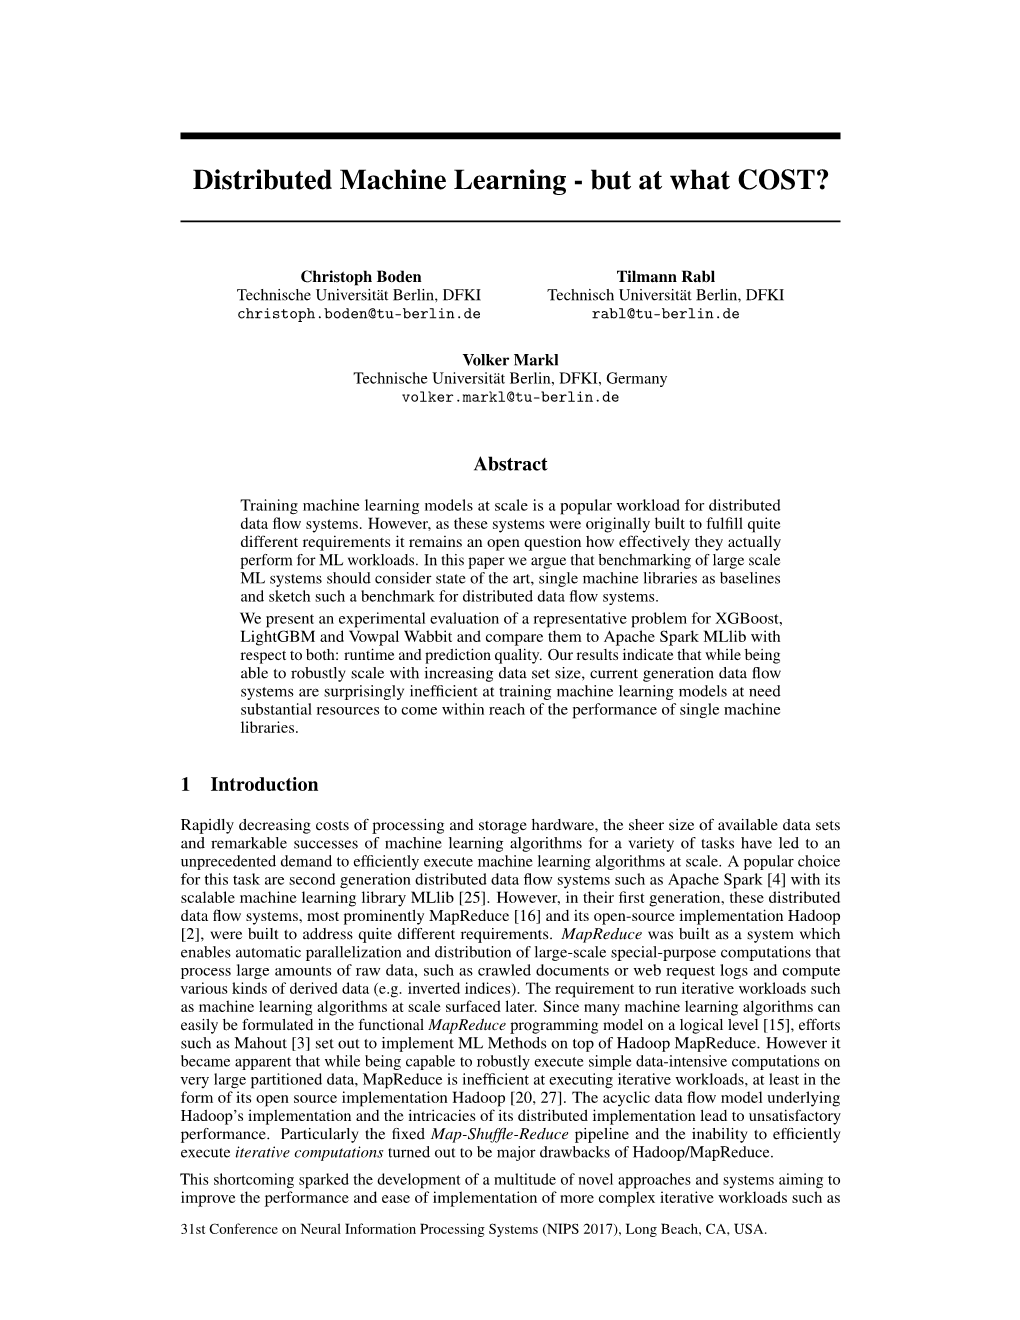 Distributed Machine Learning - but at What COST?